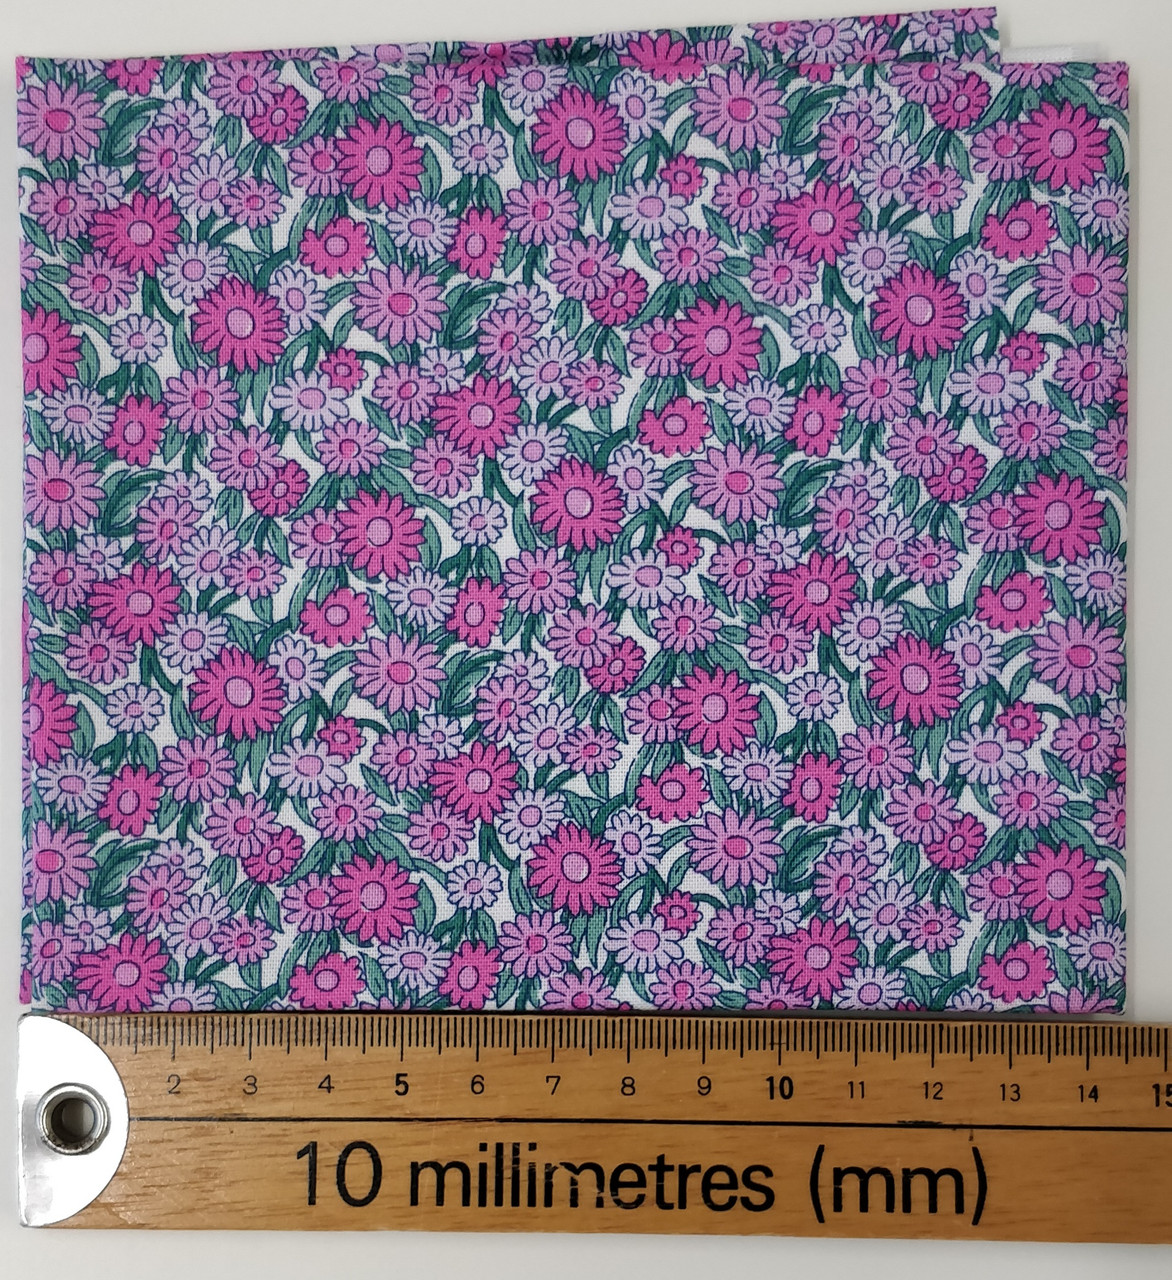 Scale of pattern shown with a ruler